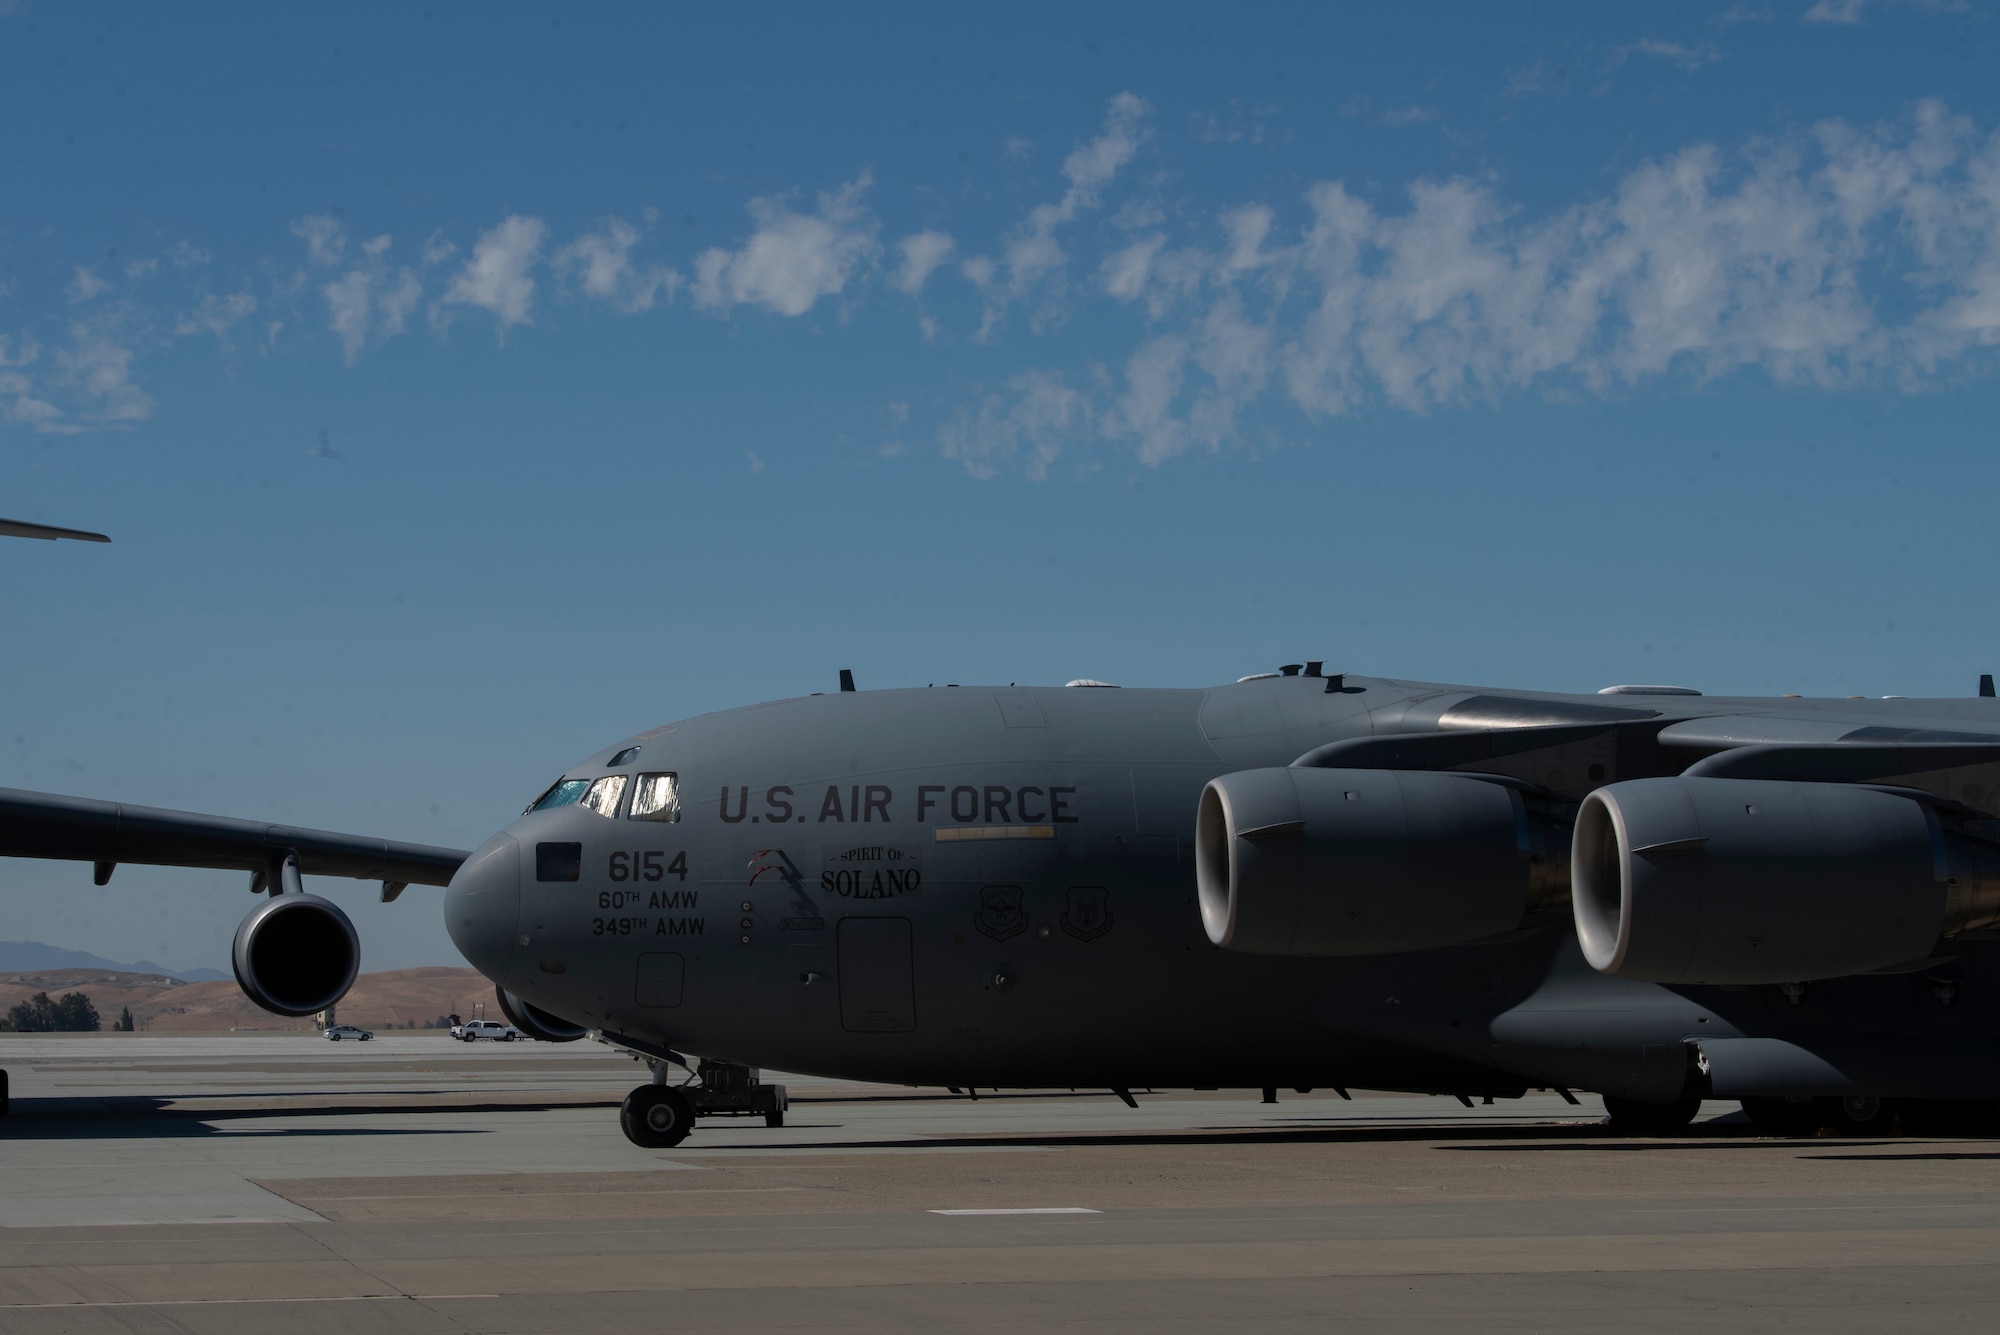 A C-17 Globemaster III is part of a static display for the 60th Operations Group change of command ceremony July 26, 2019, at Travis Air Force Base, California. The C-17 was joined in the display by a KC-10 Extender and C-5M Super Galaxy. During the ceremony, U.S. Air Force Col. Theresa Weems, outgoing 60th OG commander, transferred command to Col. Gregg Johnson. (U.S. Air Force photo by Tech. Sgt. James Hodgman)